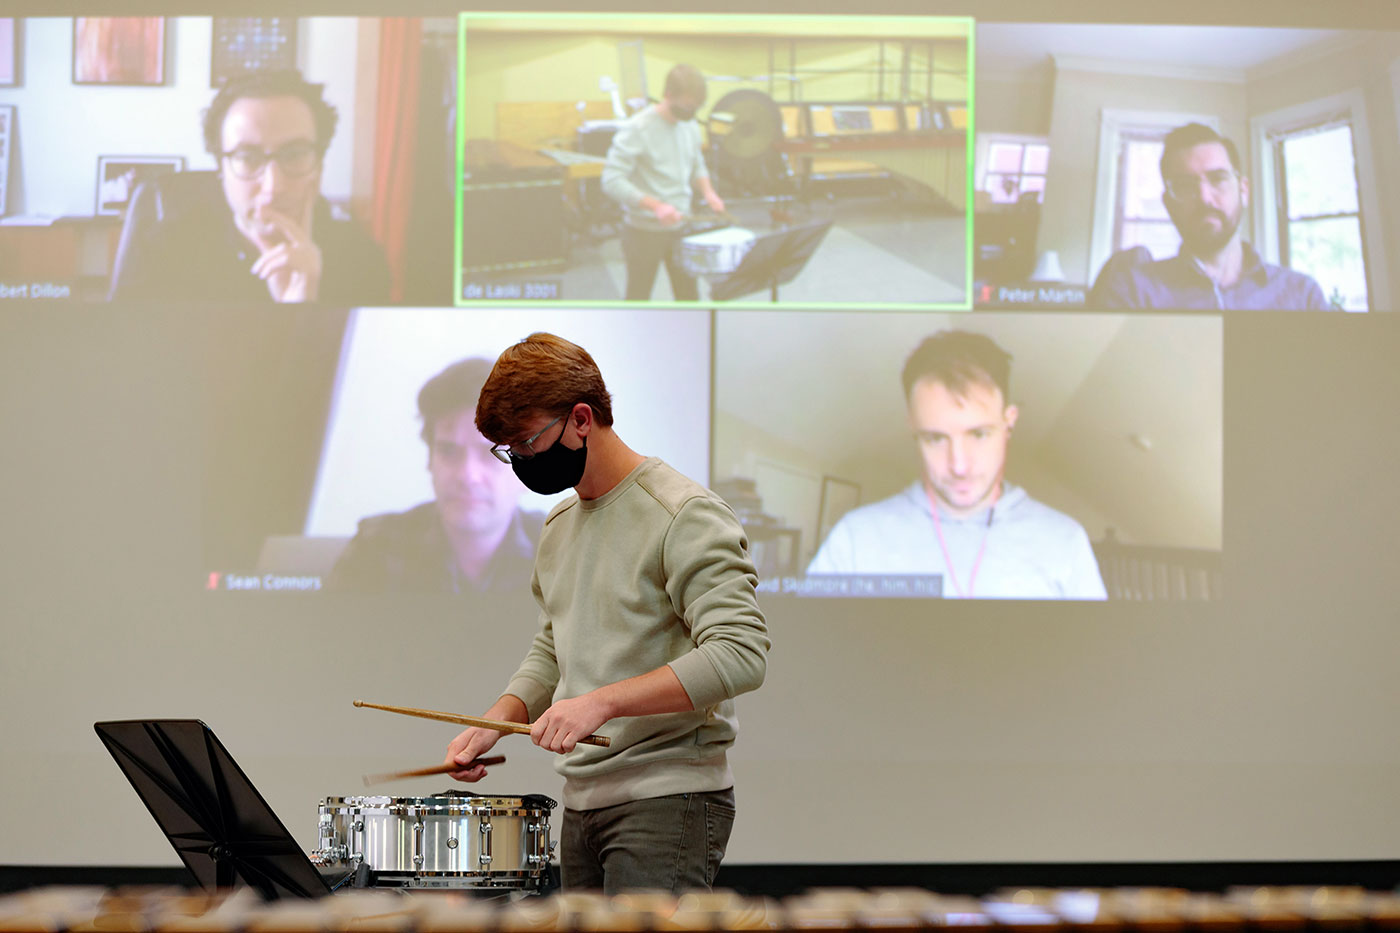 In mid-October, the College of Visual and Performing Arts and the Center for the Arts welcomed the Grammy® Award-winning Third Coast Percussion as the first virtual Mason Artist-In-Residence for the 2020-2021 season.